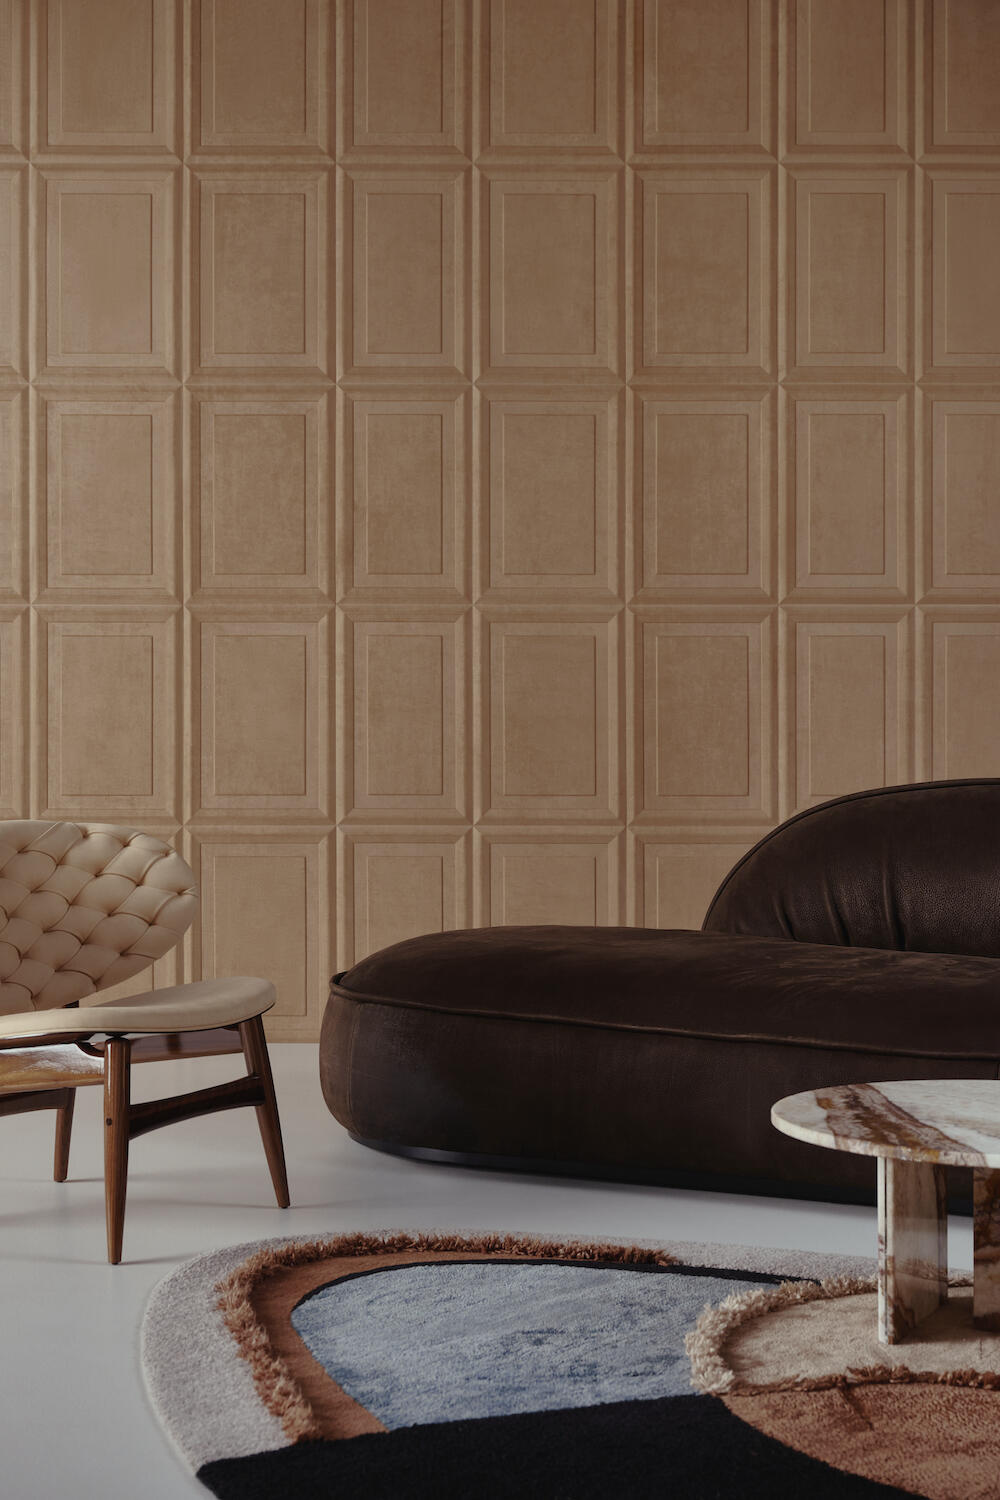 Amber Lewis’s latest line for Anthropologie, 3D-printed wallcoverings from Arte and more